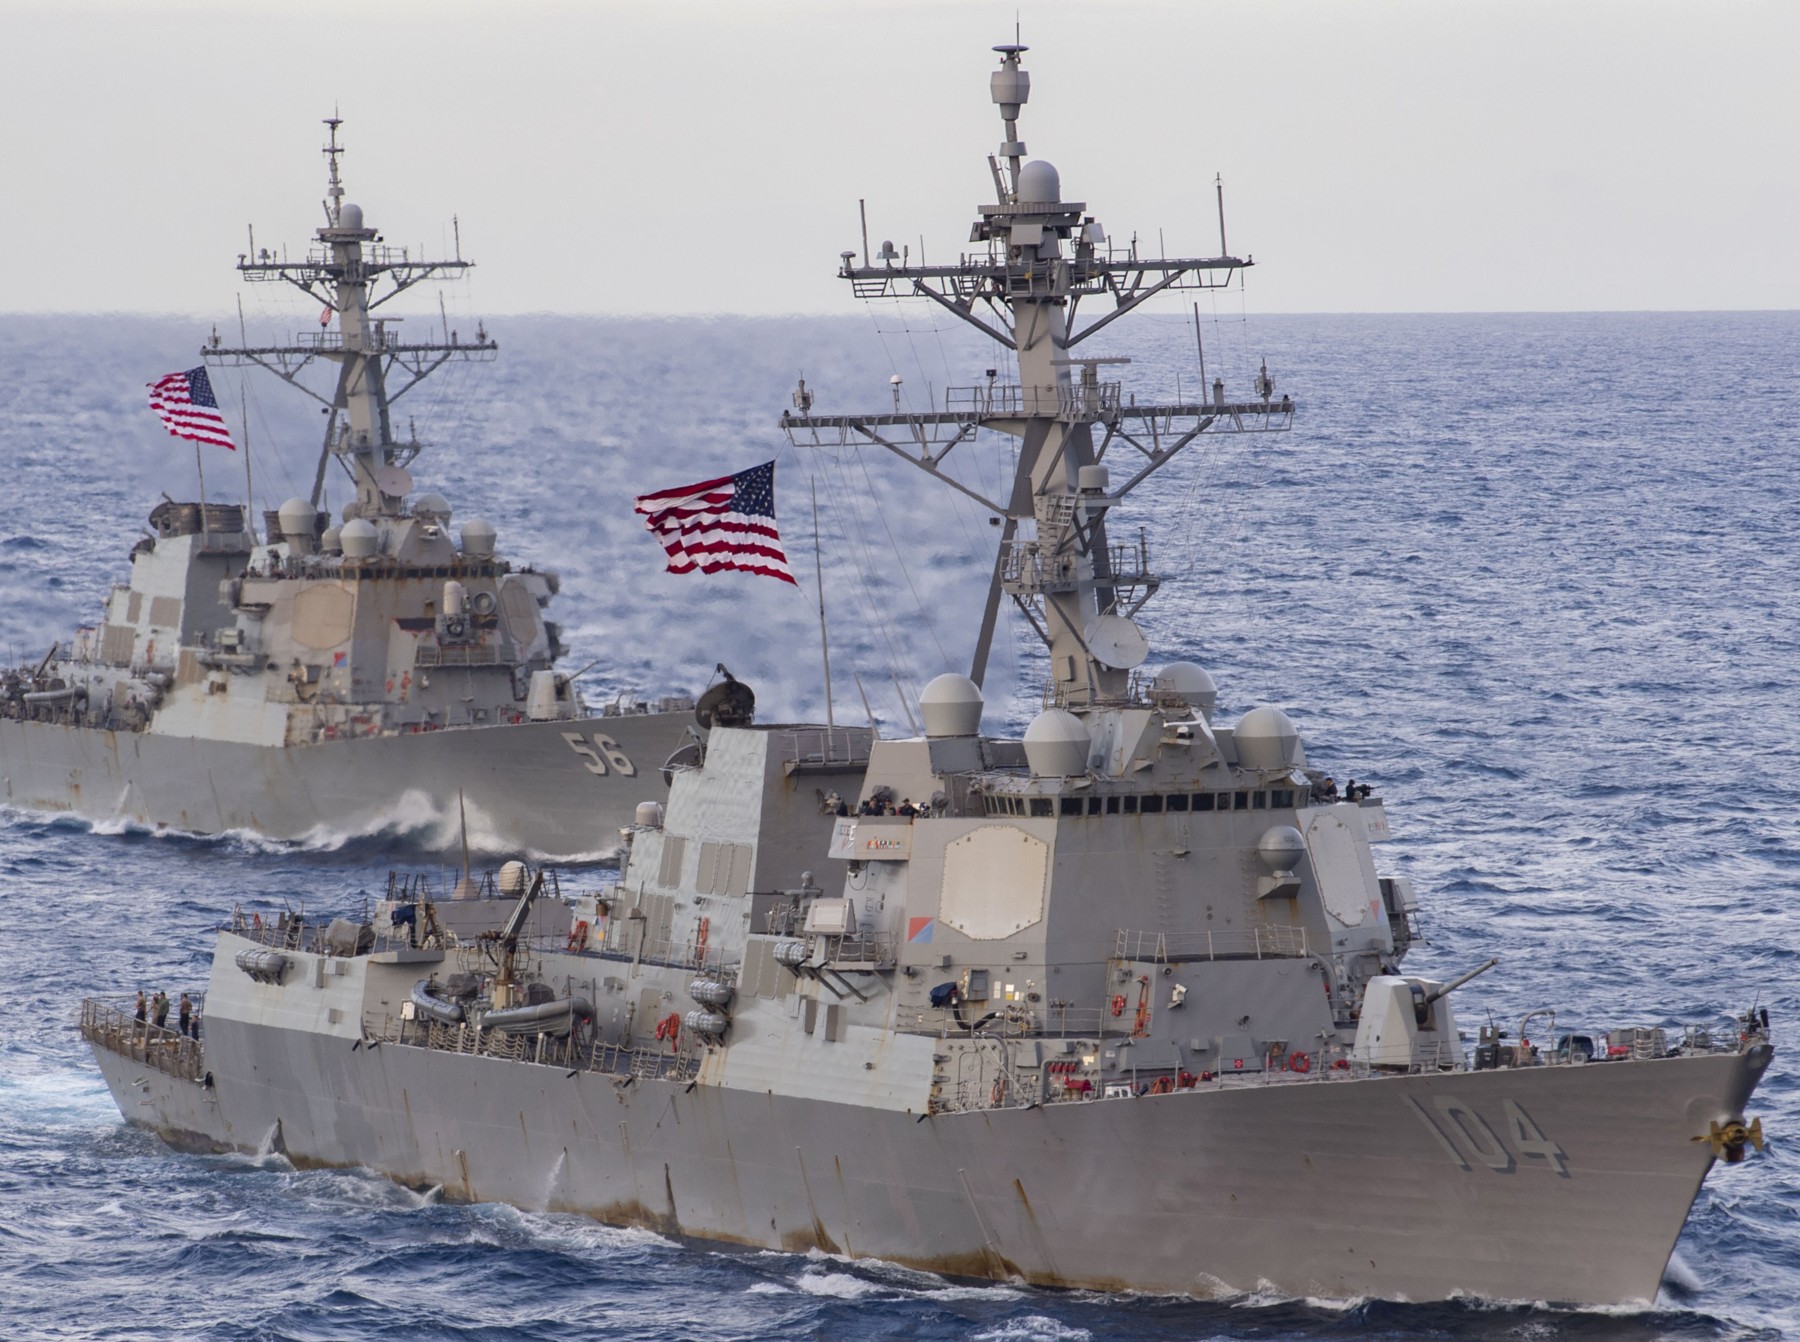 ddg-104 uss sterett arleigh burke class guided missile destroyer aegis us navy south china sea 79